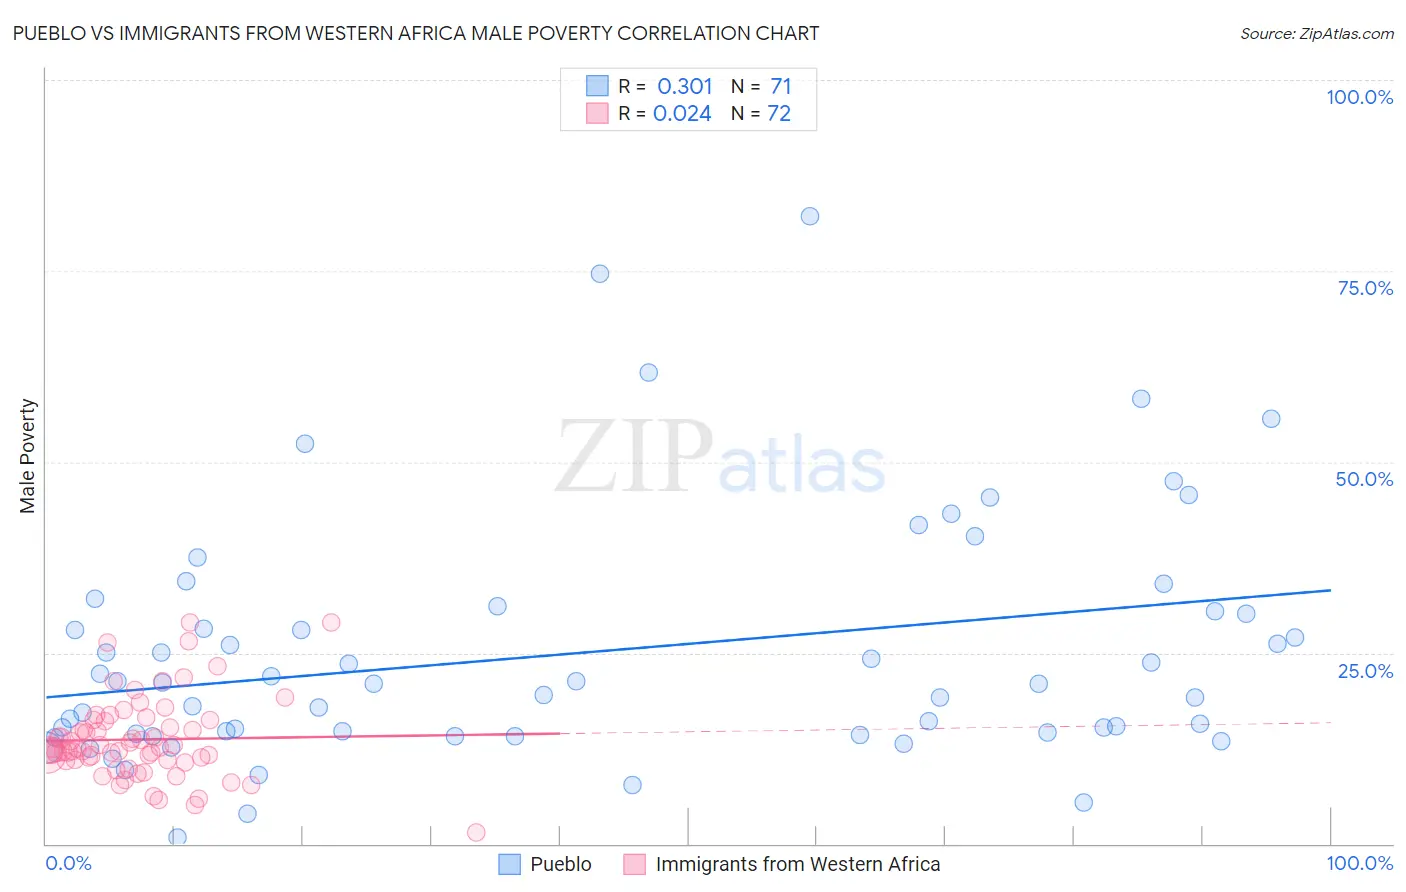 Pueblo vs Immigrants from Western Africa Male Poverty